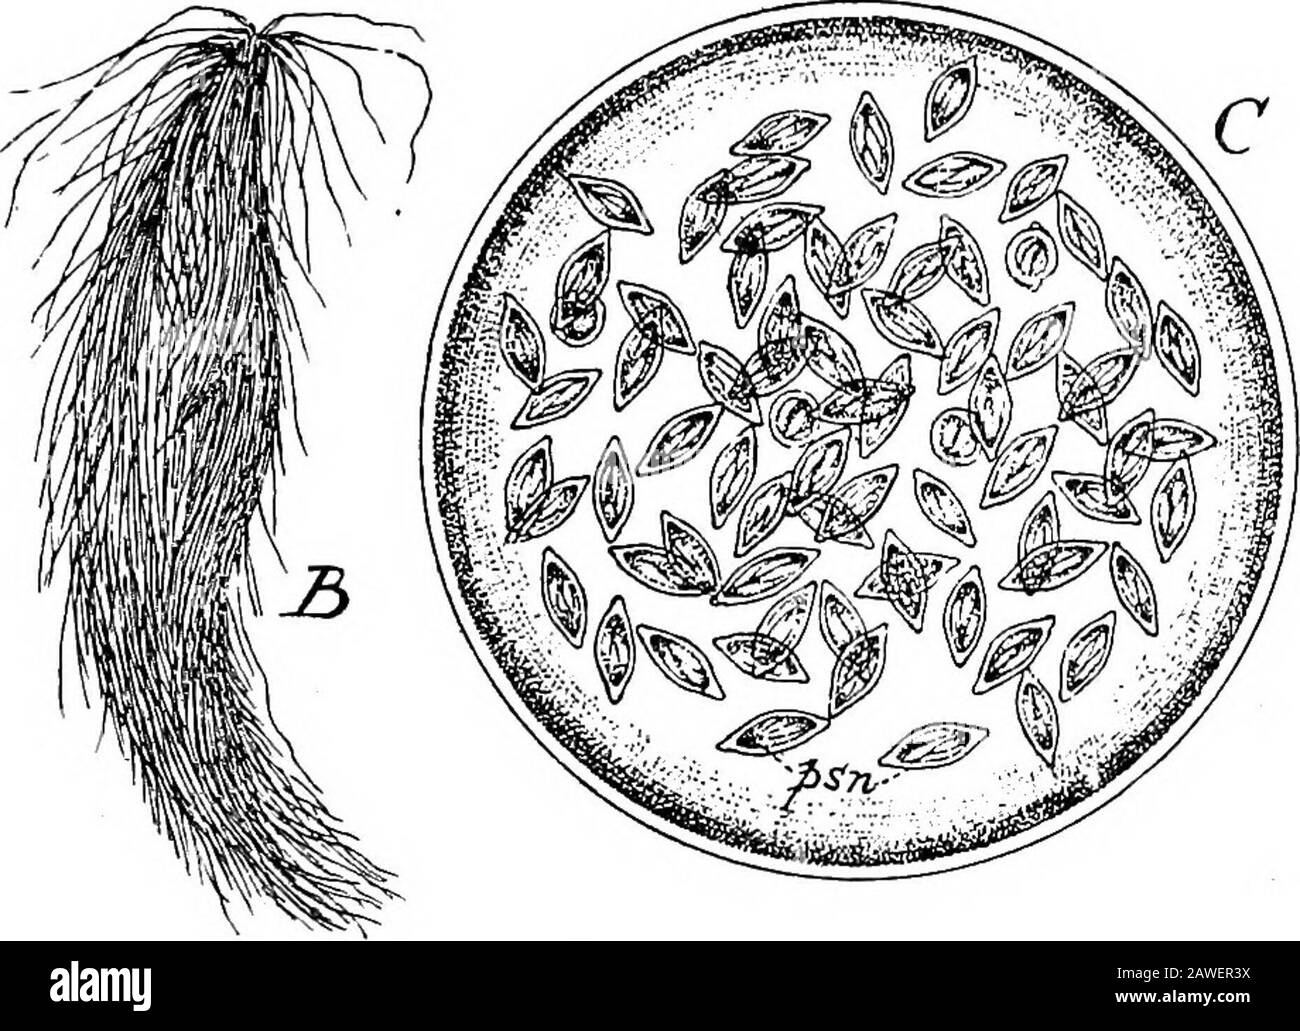 An introduction to the study of the comparative anatomy of animals . A. Fig- 32-A^ a free specimen of Monocystis a^Hs, nu, nucleus. 5, sperm-motber cells adhering to the parasite, i), a free monocystiscovered with ripe spermatozoa, and thus appearing as if coveredwith a coat of long cilia. C, a ripe cyst of Monocystis agiliscontainingnumerouspseudonavicellae/.rff. {A and .5, original;C, after Lankester.) is termed a zygote (Greek C^y^, a yoke, because the twoare yoked or joined together). The zygotes contract intospherical form, and each contributes to the formation of acommon transparent prot Stock Photo